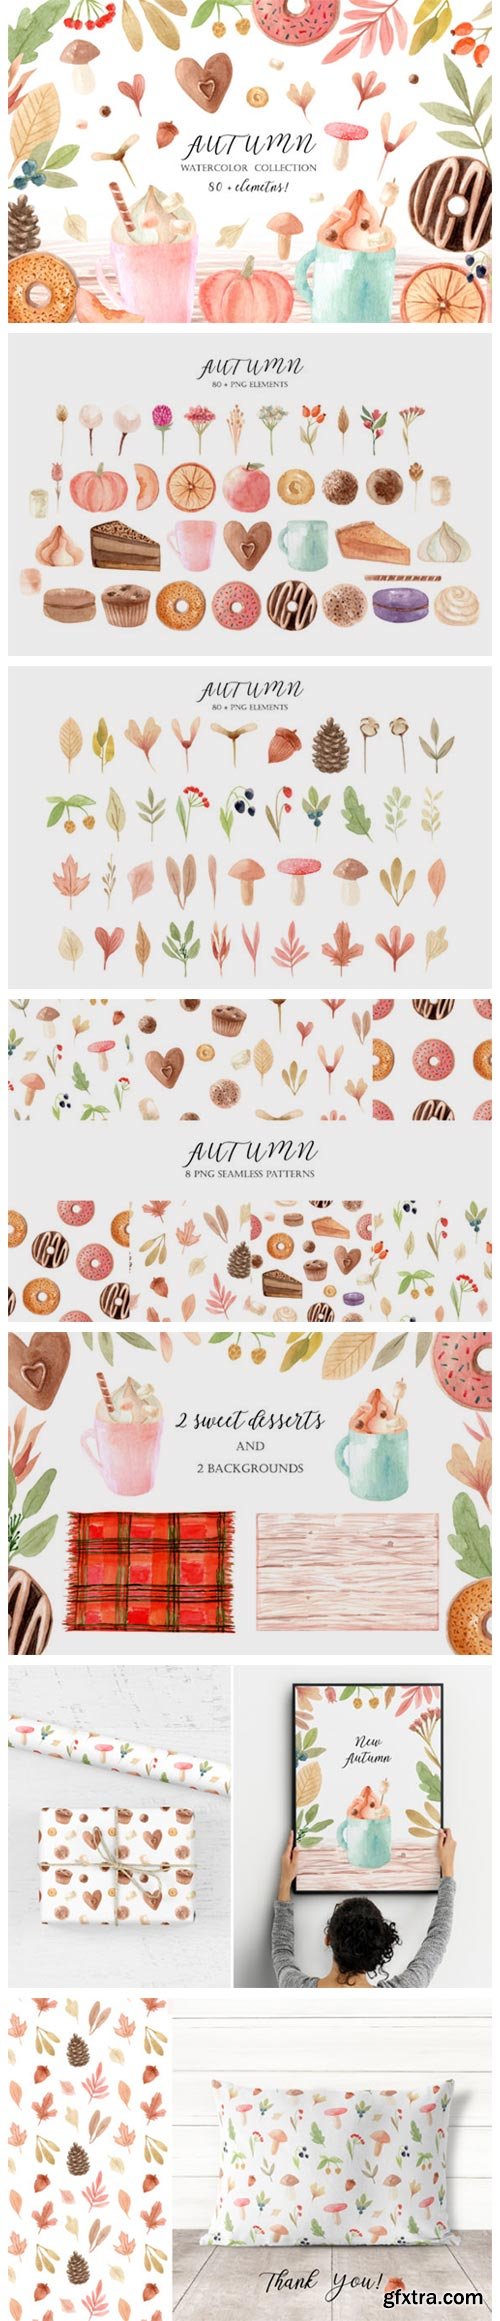 Watercolor Autumn Clipart Collection 4107307